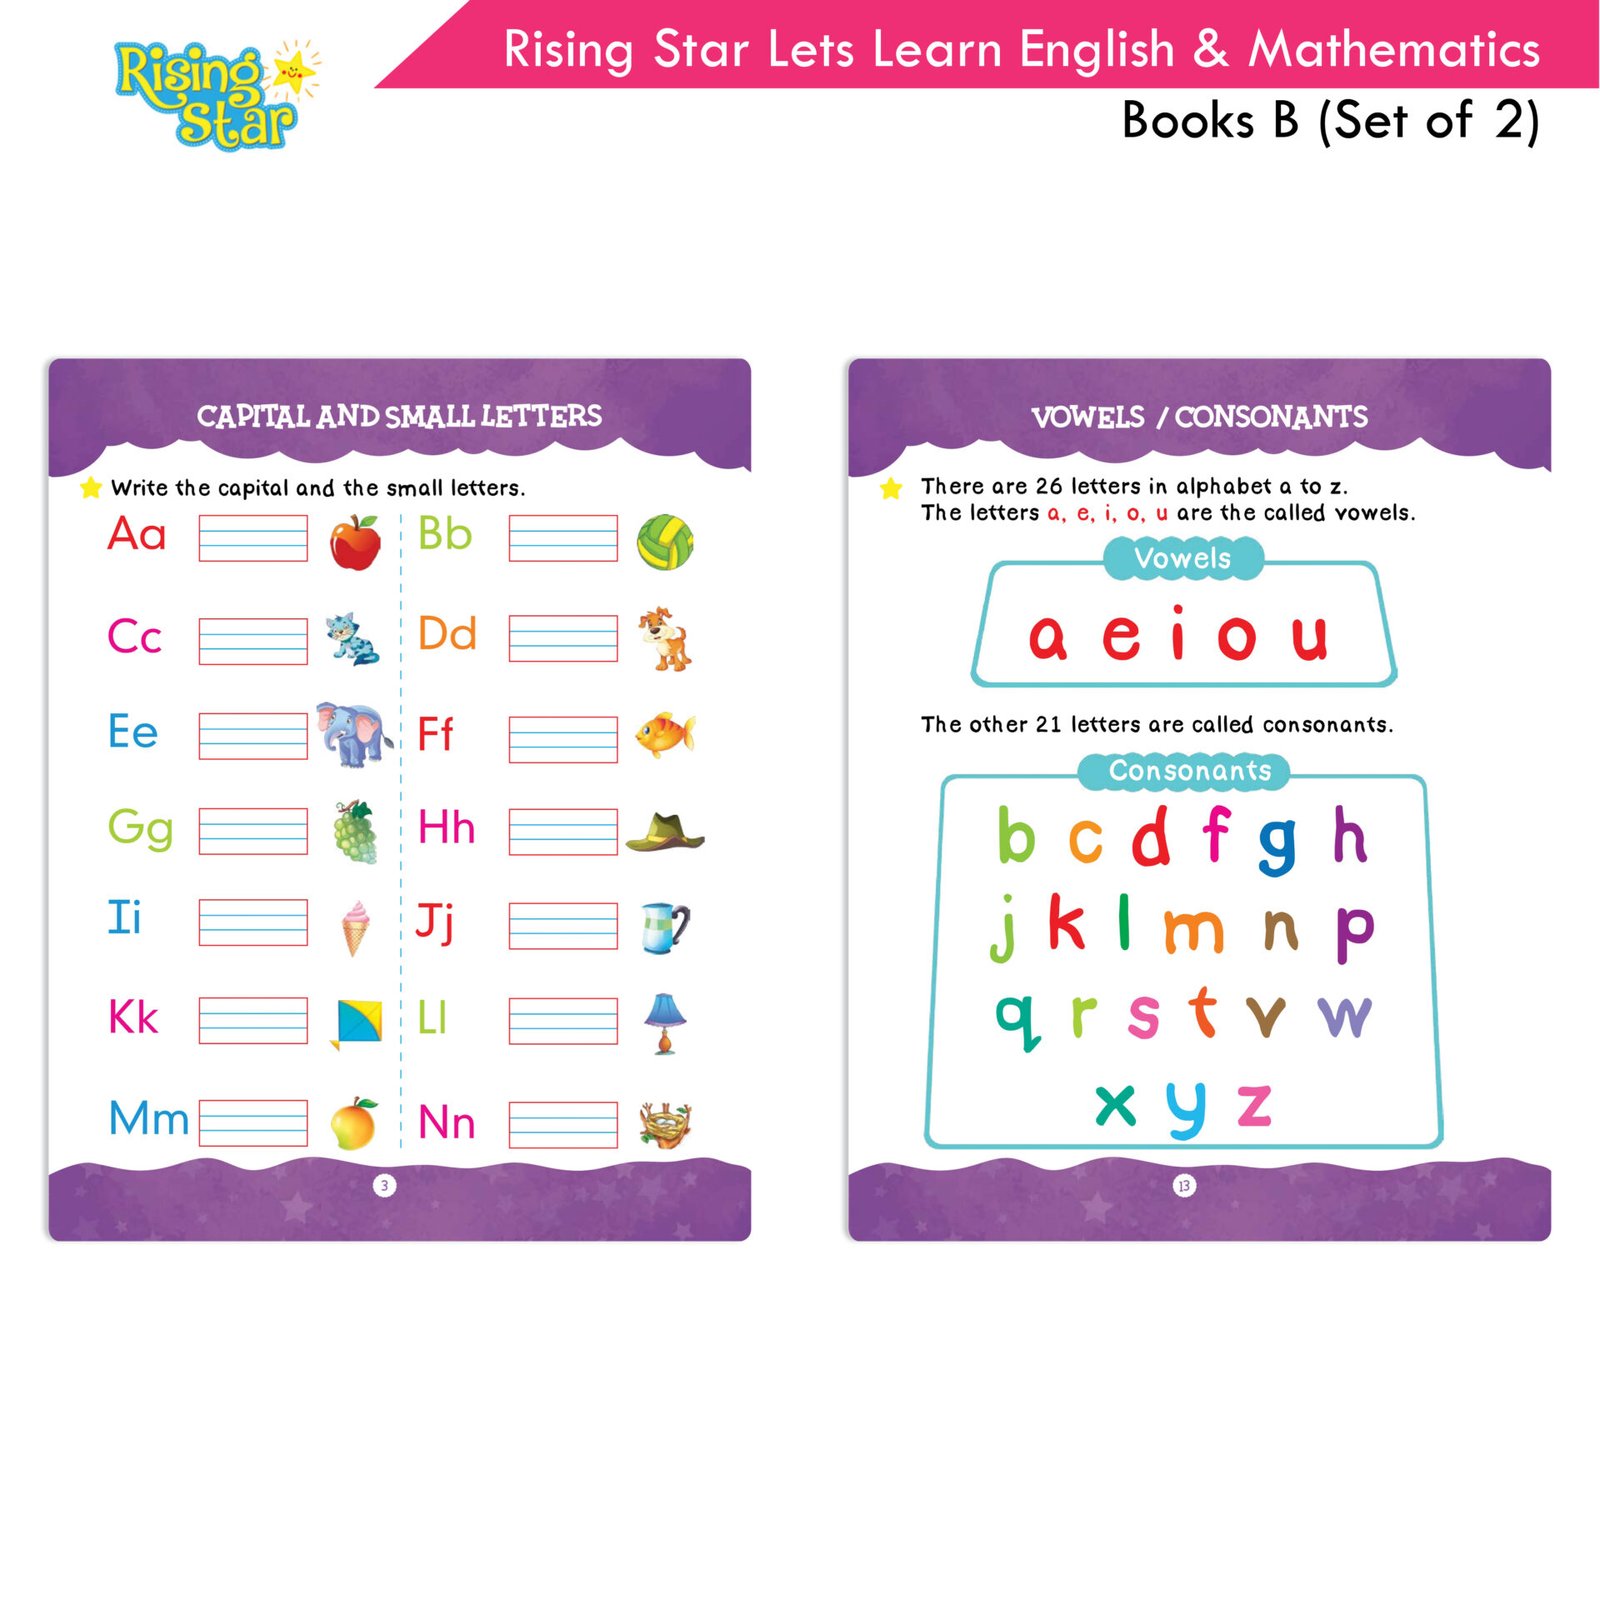 Rising Star Lets Learn English and Mathematics Books B Set of 2 5